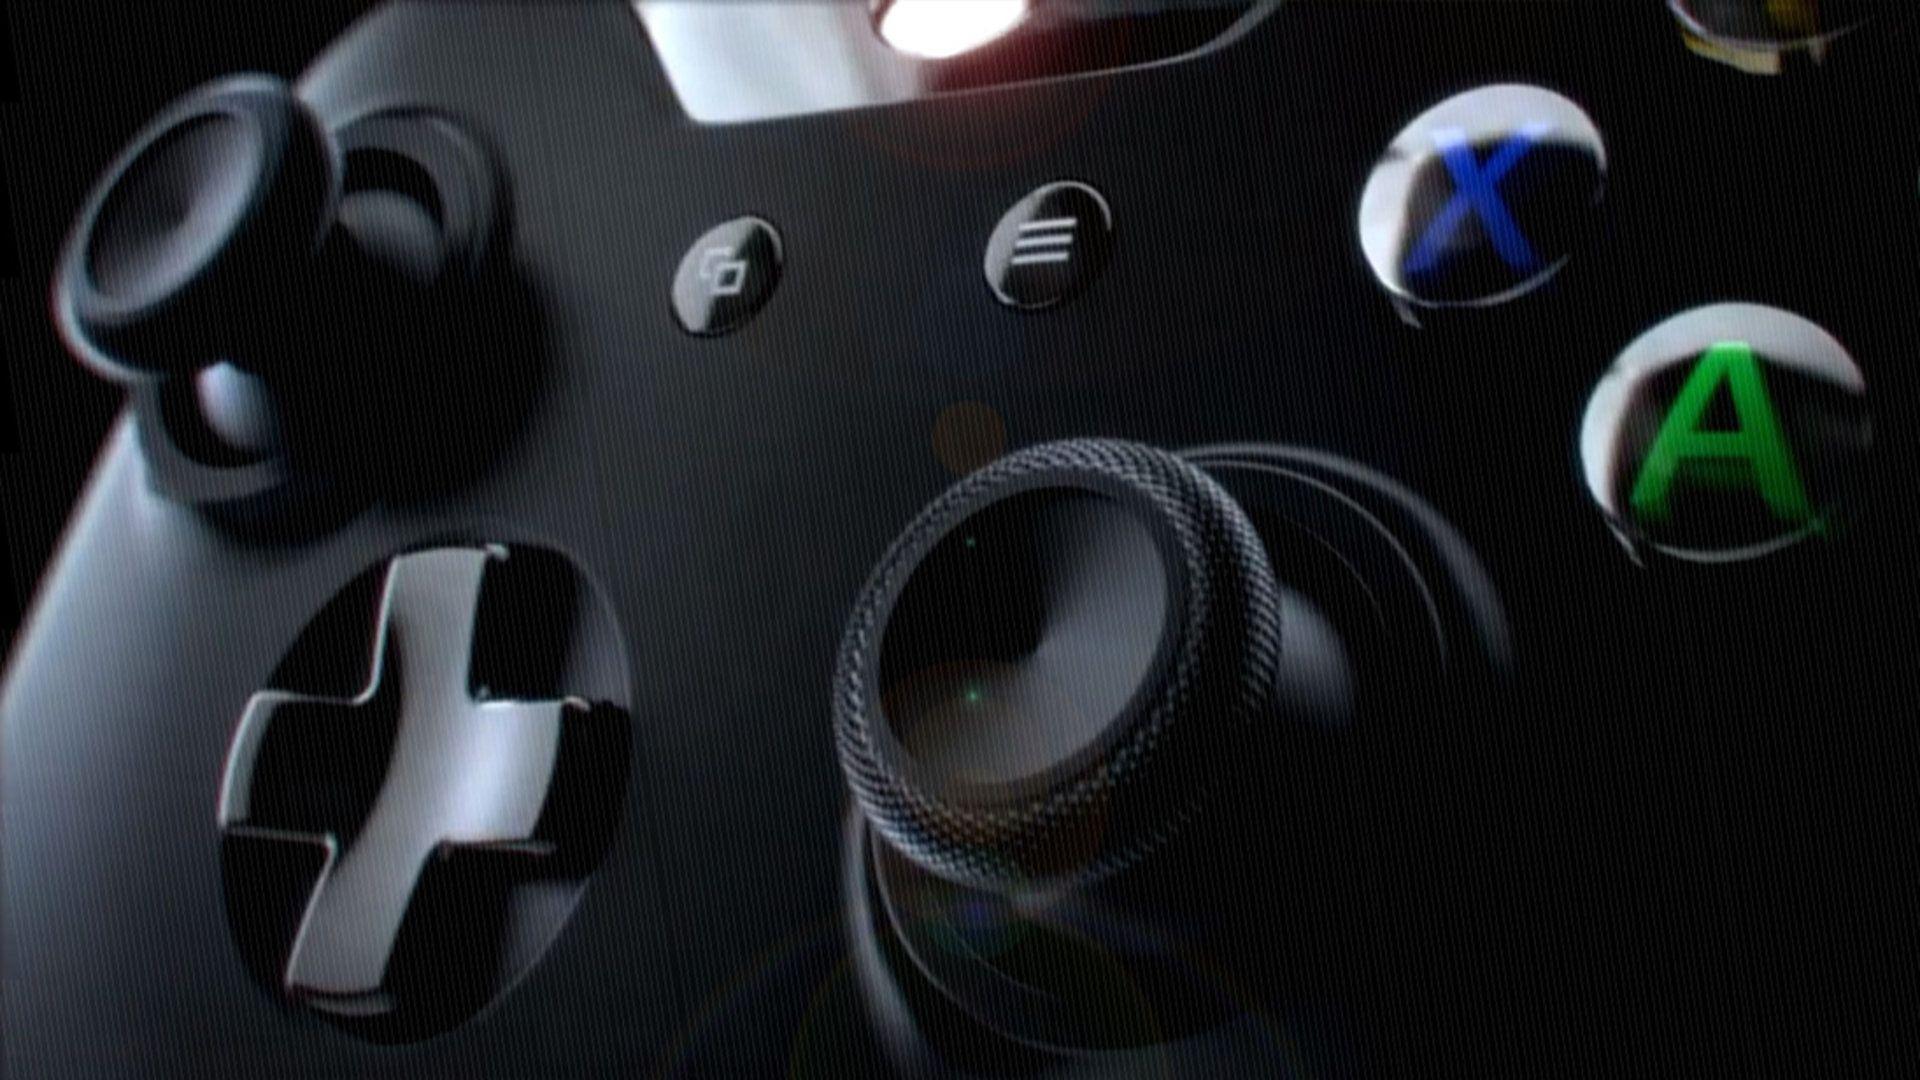 Microsoft to launch Xbox One controller for Windows